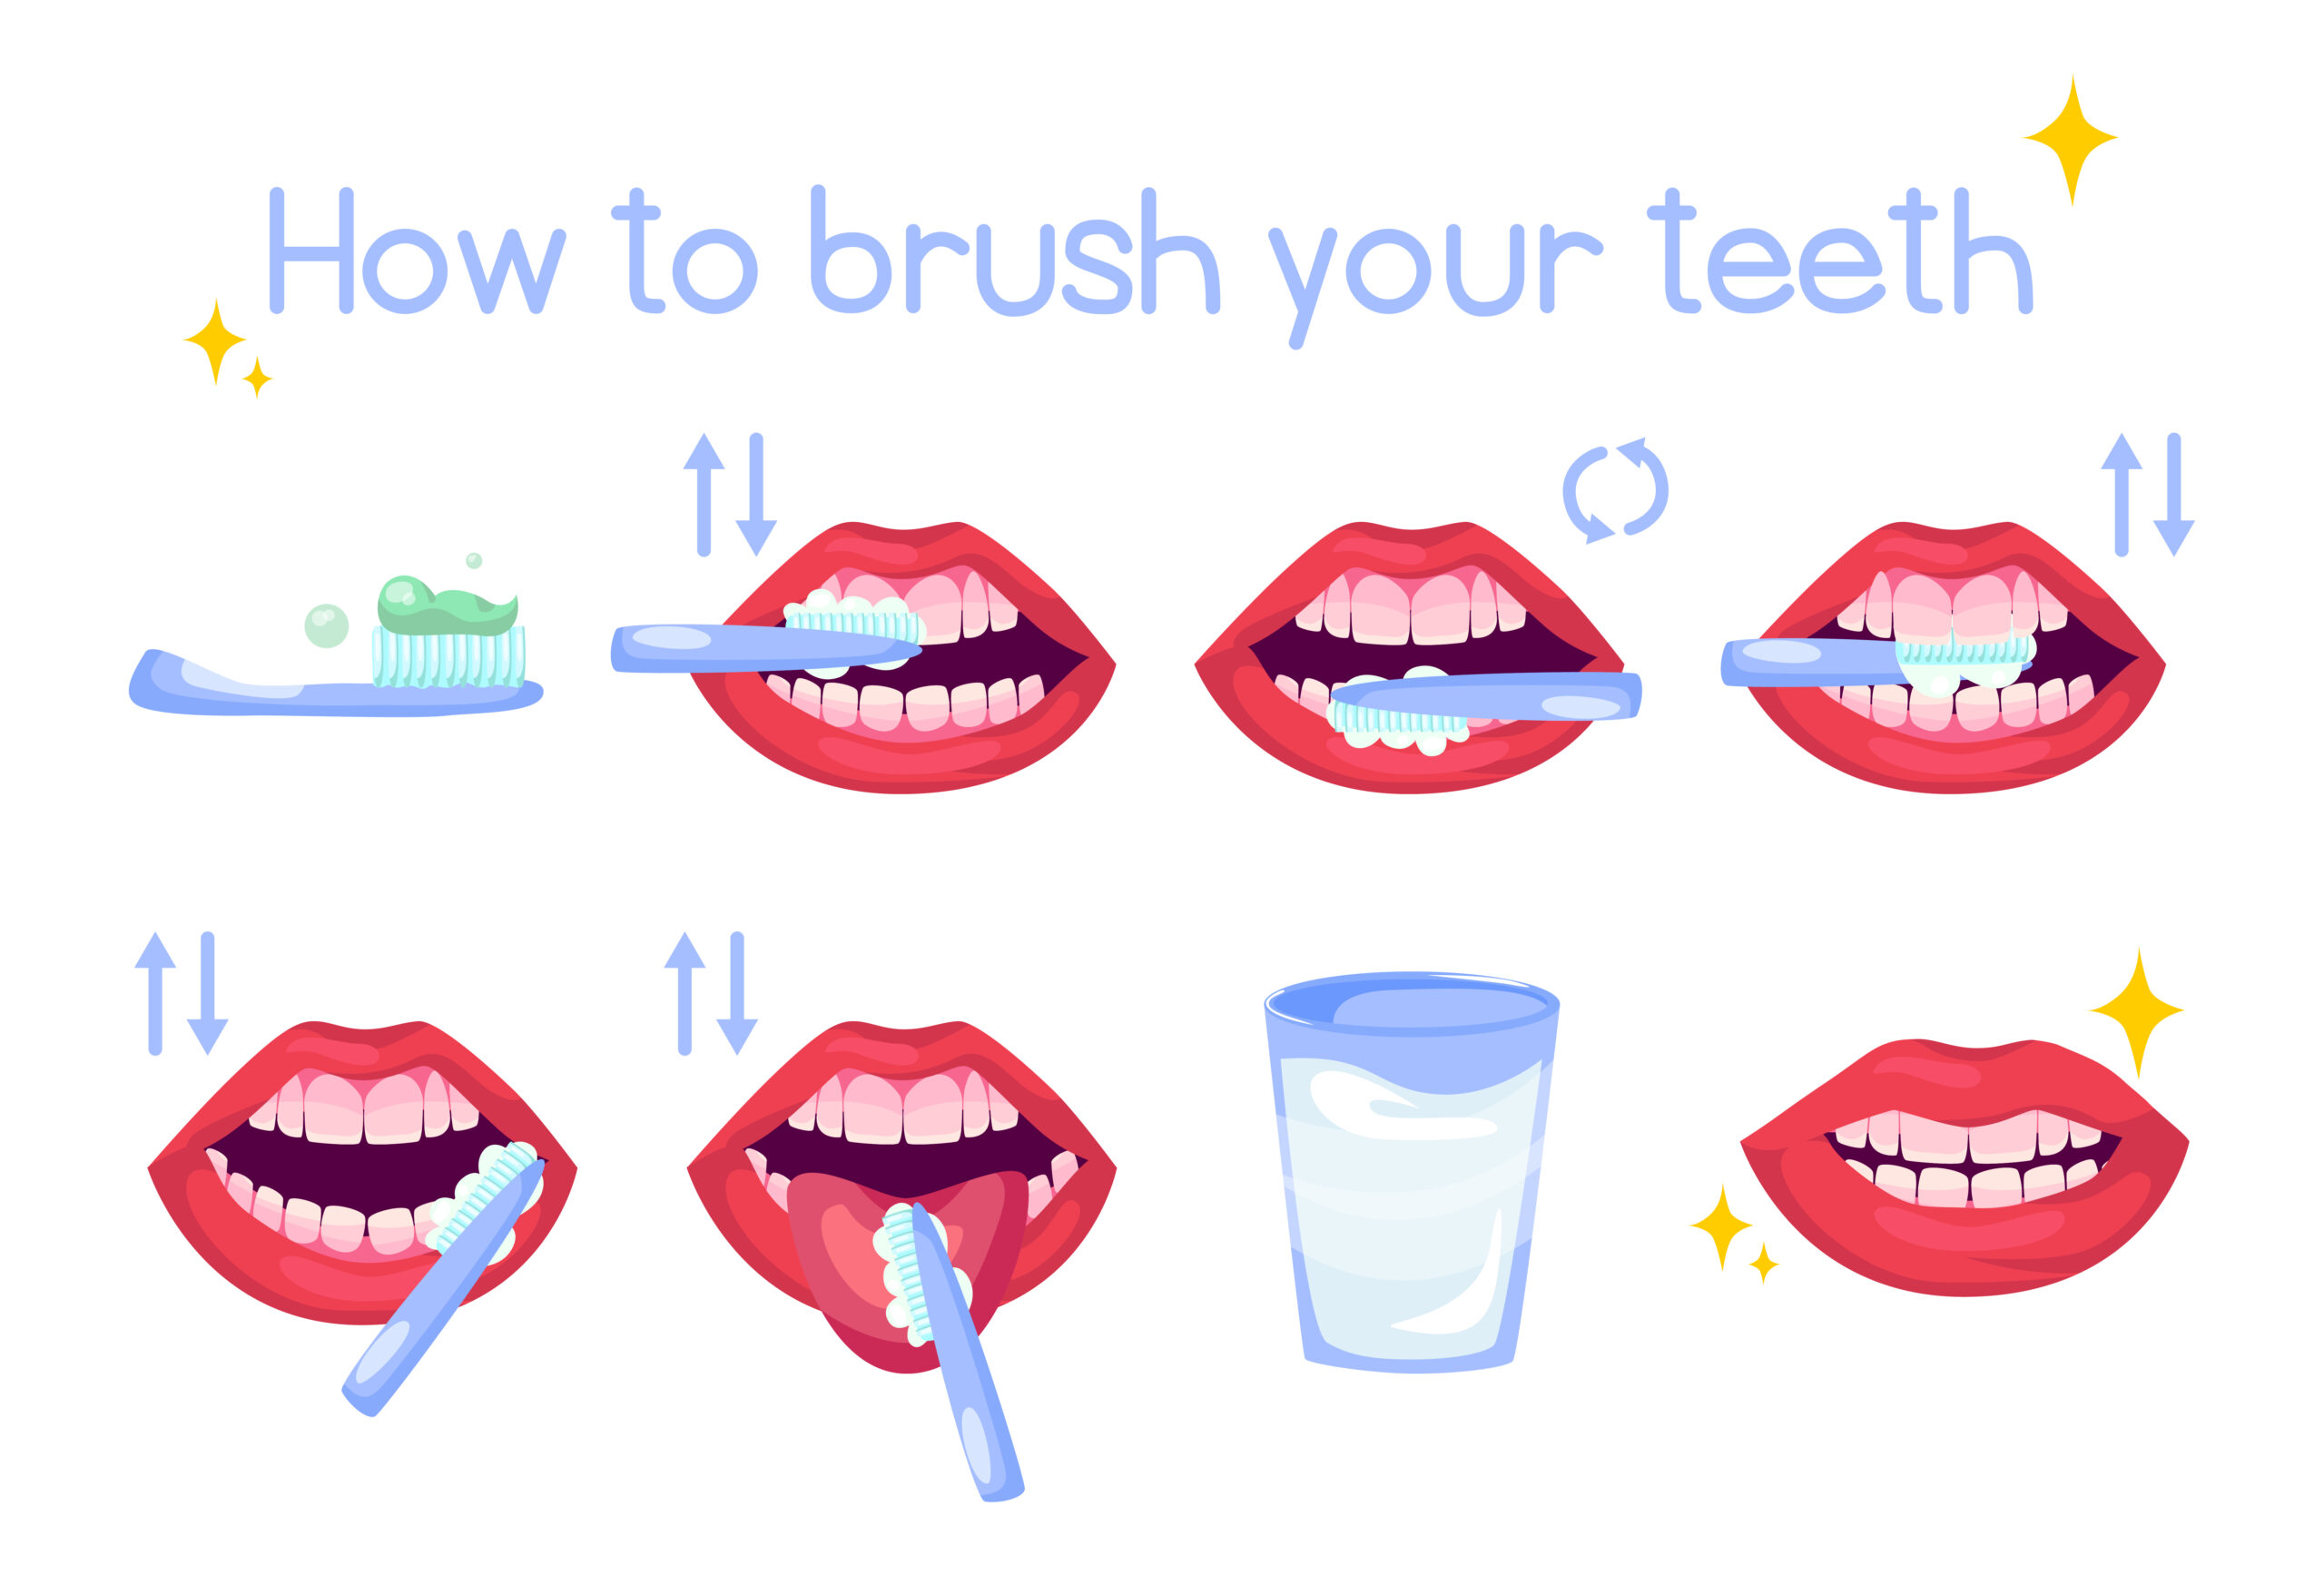 Instruction on how to brush teeth